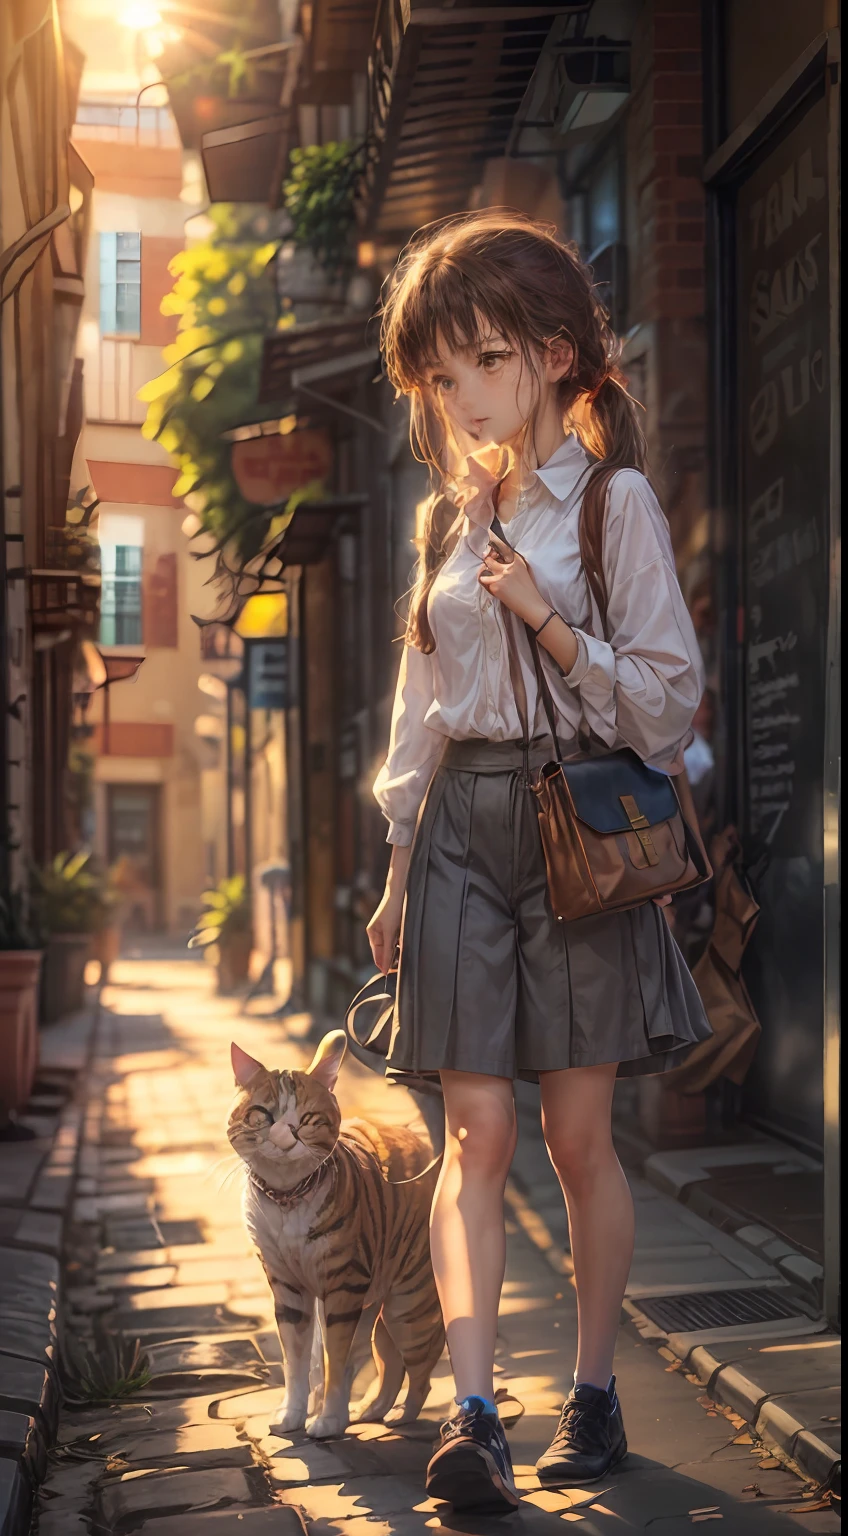 A 13-year-old girl, walking alone in an alley, coming home from get off work, wearing white office clothes, the top of her clothes is unbuttoned, looks tired and weak, her hair is a little messy, but there is a slight smile on her lips, holding a briefcase, there is a cat on it, a trash can, and a few parked bicycles, the sunset rays look perfect with her golden light behind,  The sky is orange, but still blue on the closest side, the photo was taken from a lower corner close to the alley floor